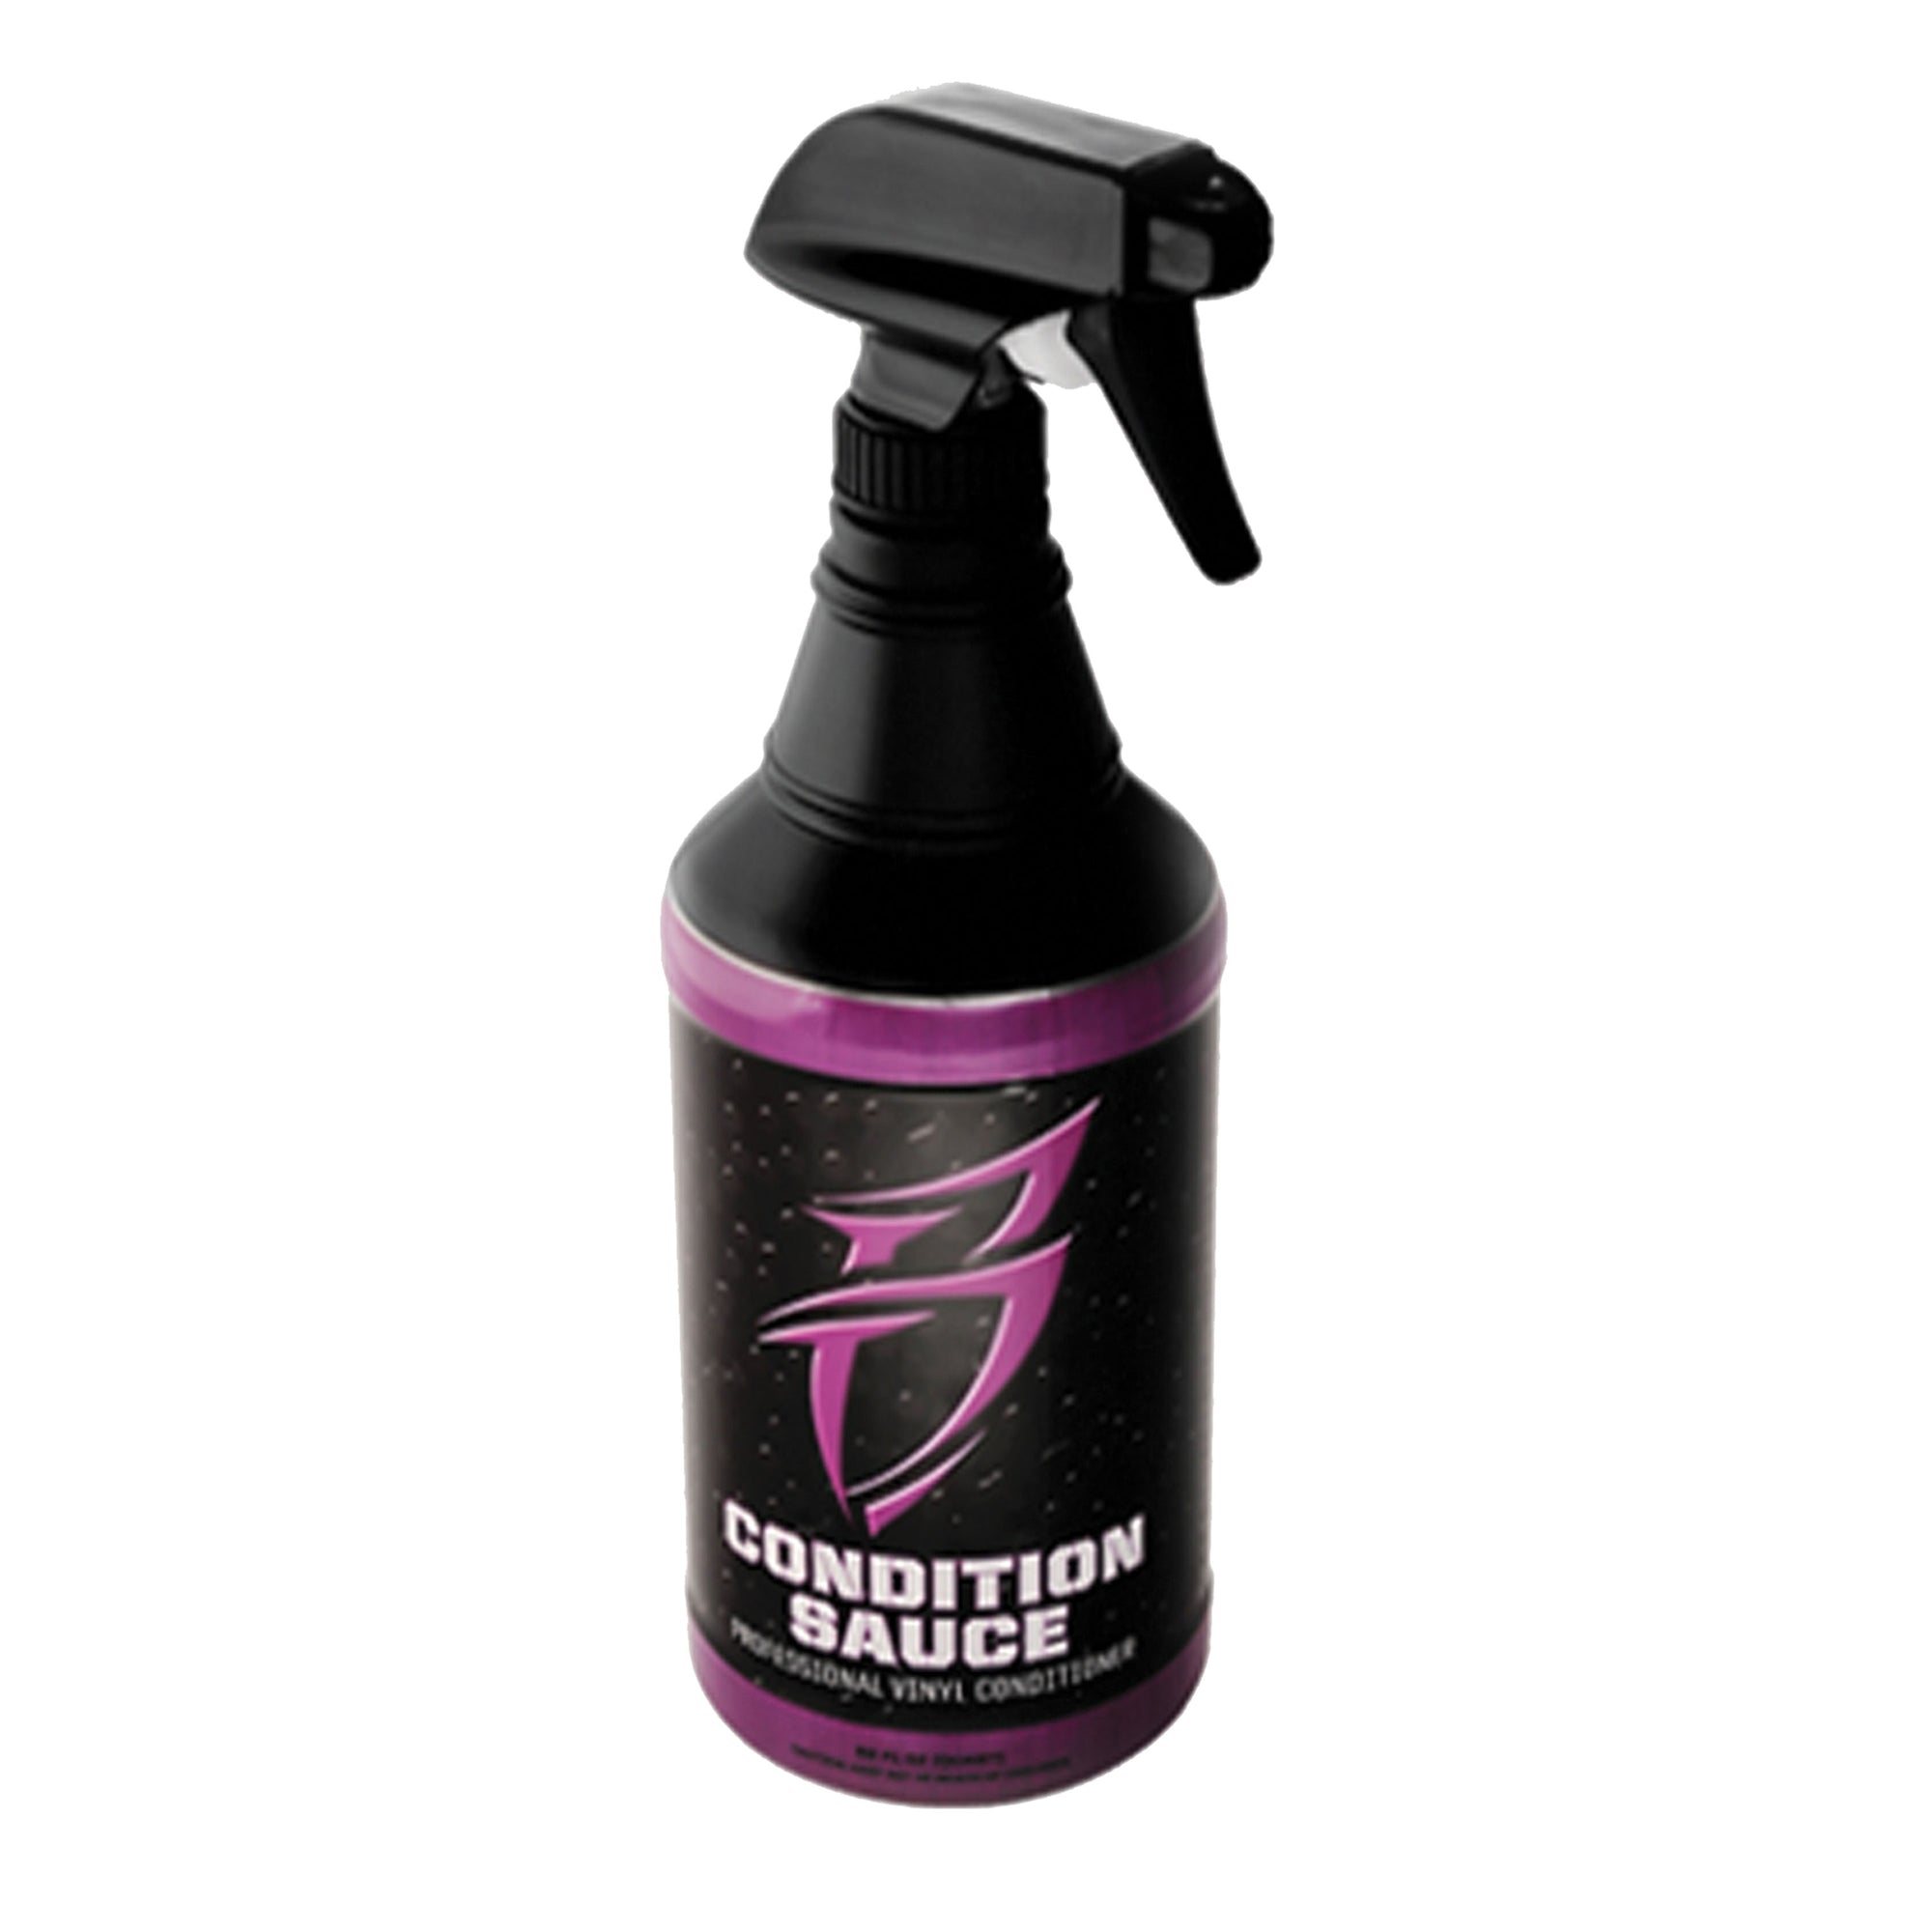 Boat Bling CS-0032 Condition Sauce - Professional Moisturizing Conditioner w/UV Protection, 32 oz.